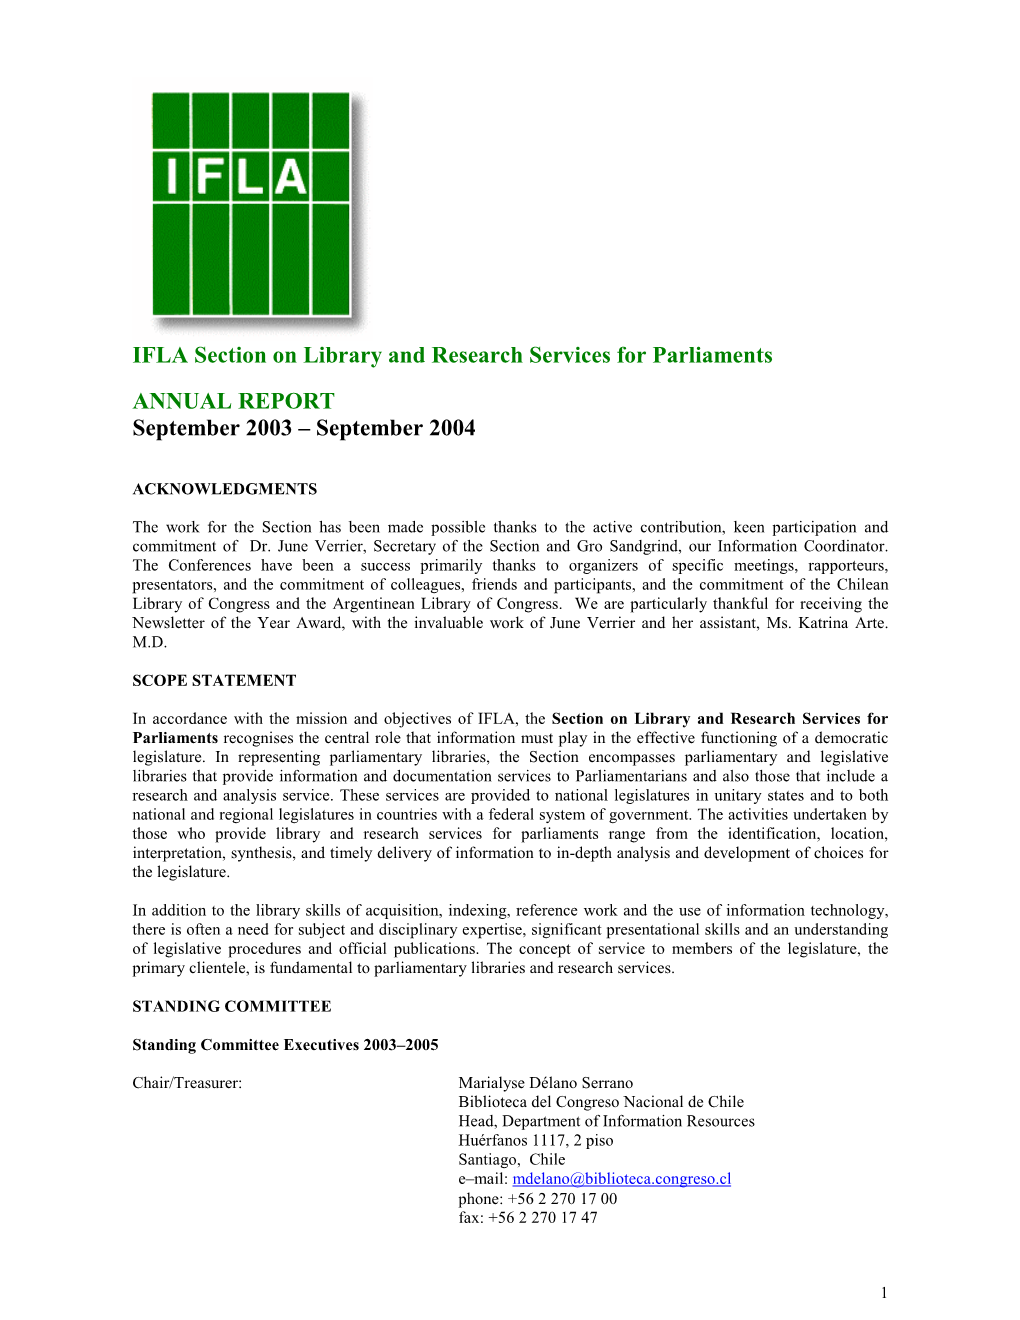 IFLA Section on Library and Research Services for Parliaments ANNUAL REPORT September 2003 – September 2004